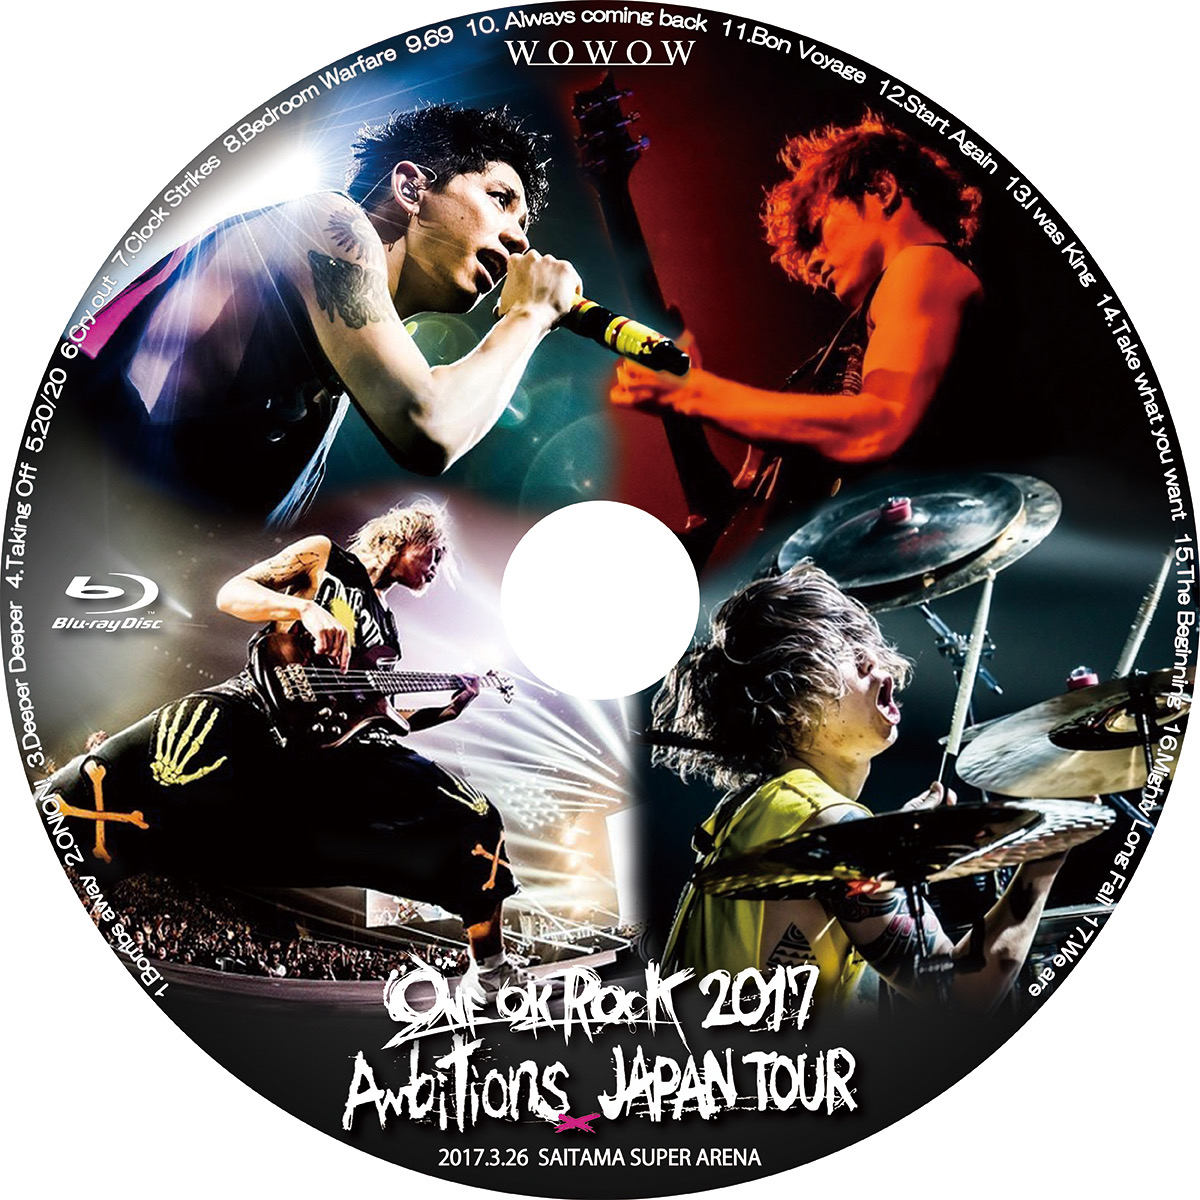 ONE OK ROCK 2017 “Ambitions” JAPAN TOUR WOWOWライブ : こんな ...